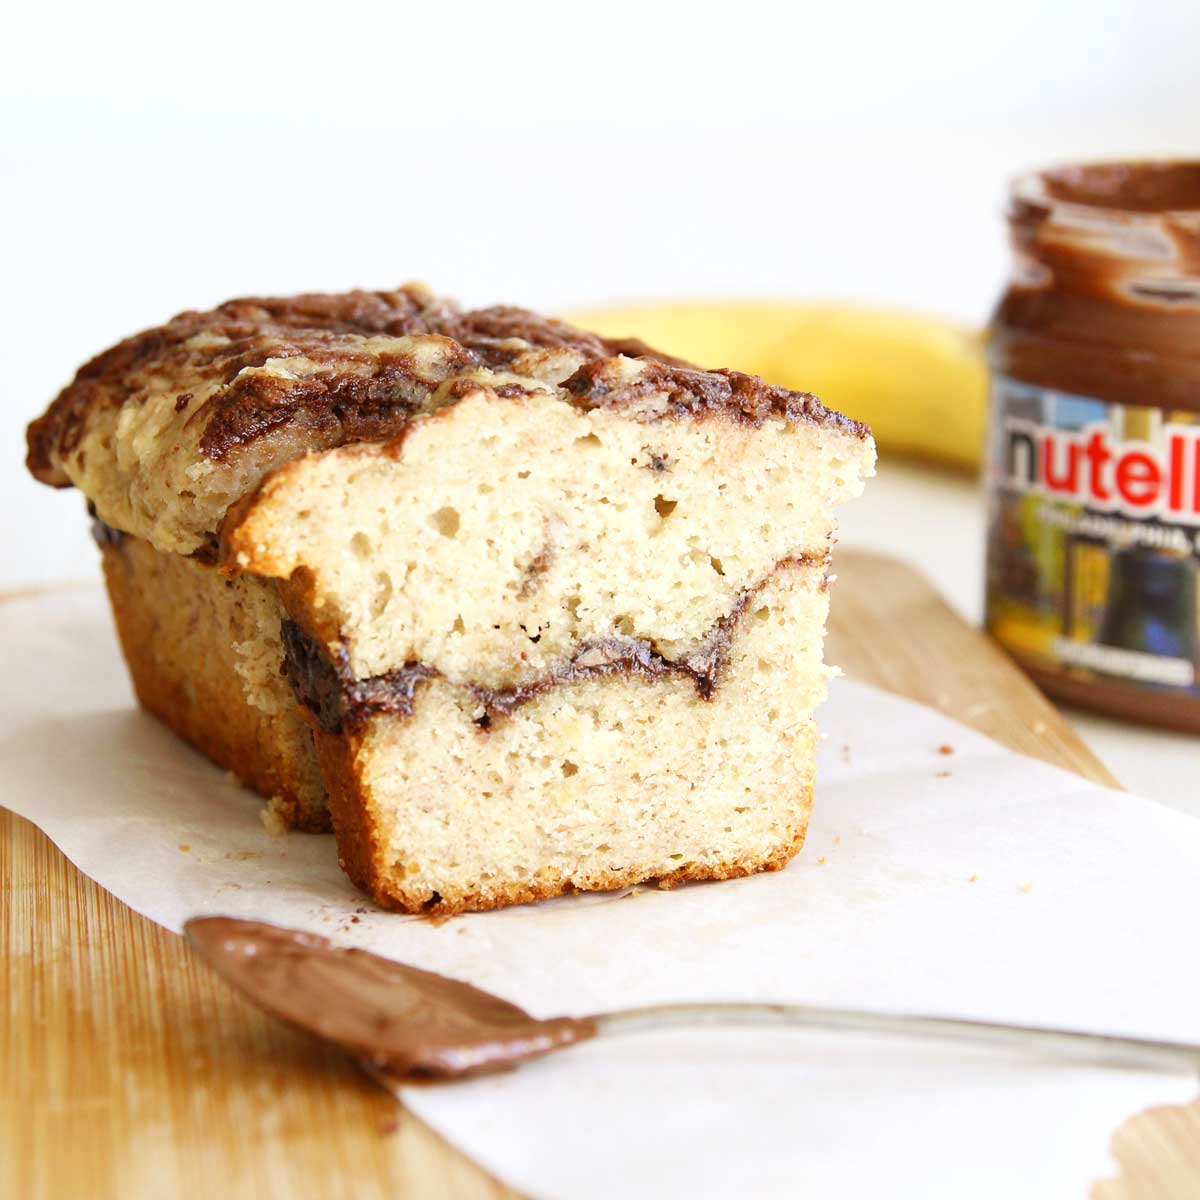 Super Moist Nutella Stuffed Banana Bread with Olive Oil & Almond Flour - Brown Sugar Whipped Cream